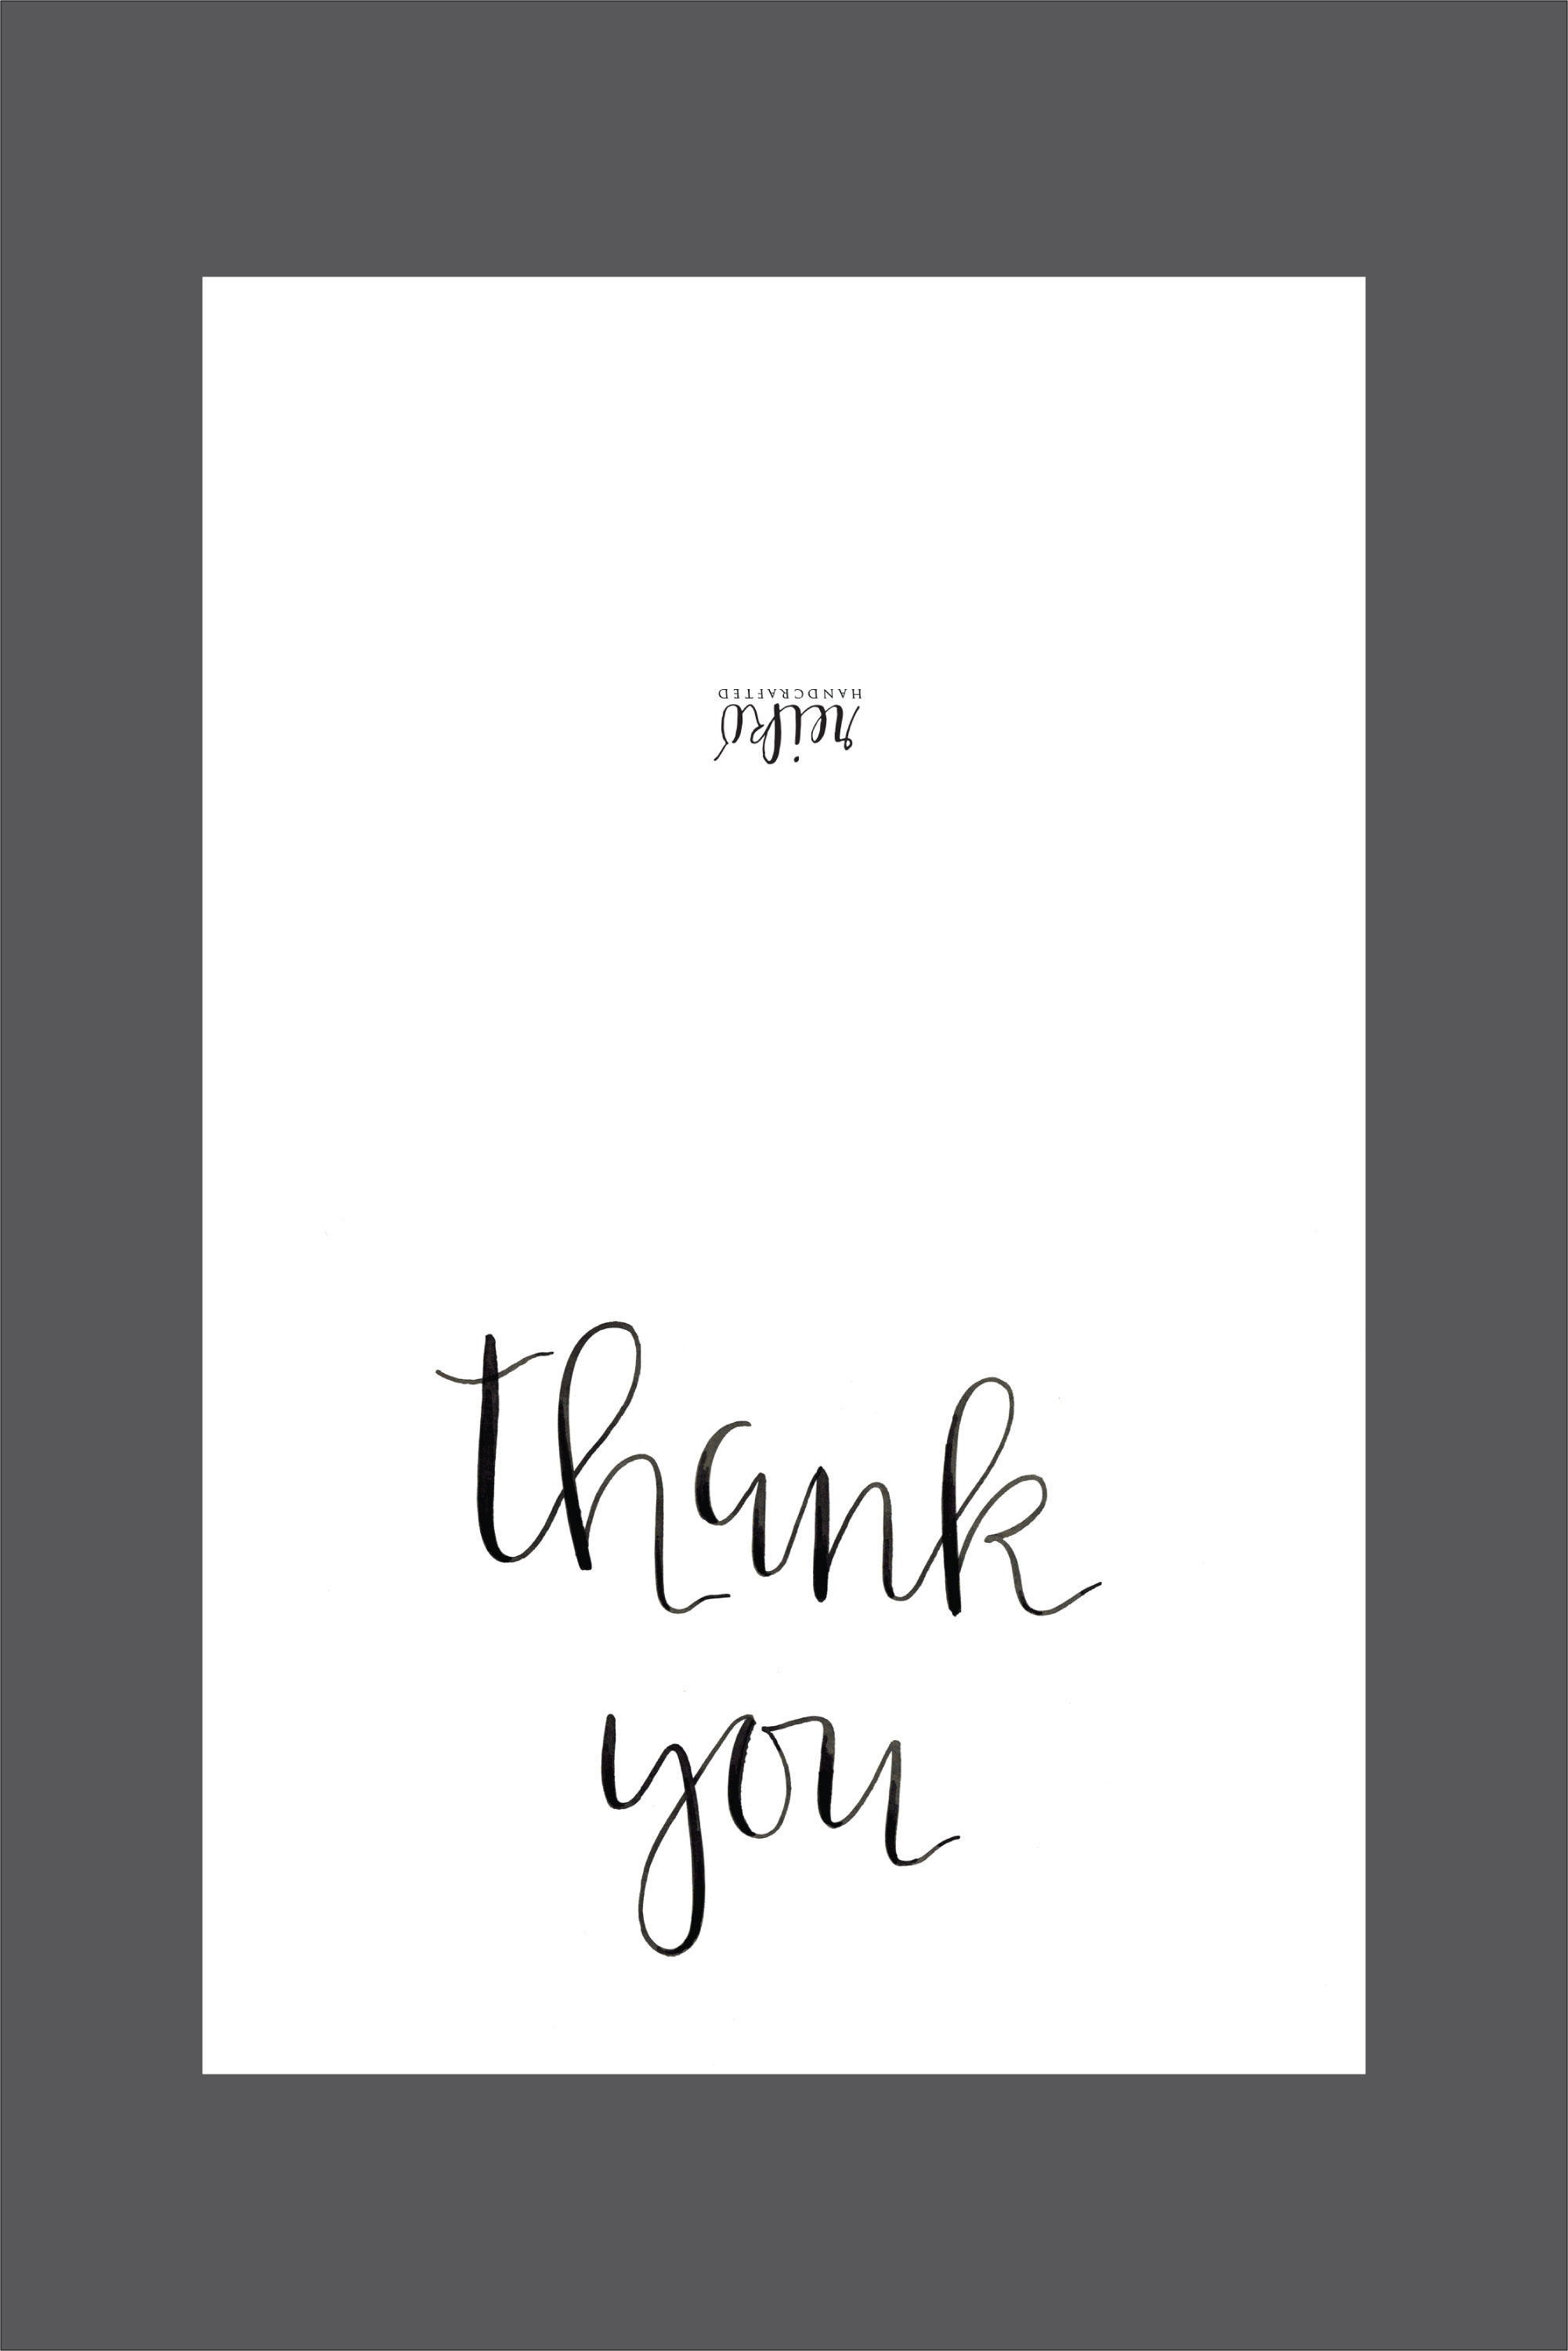 Custom, Specialty Sugar Cookies And Pastries :: Hot Hands Bakery - Thank You Card Free Printable Template